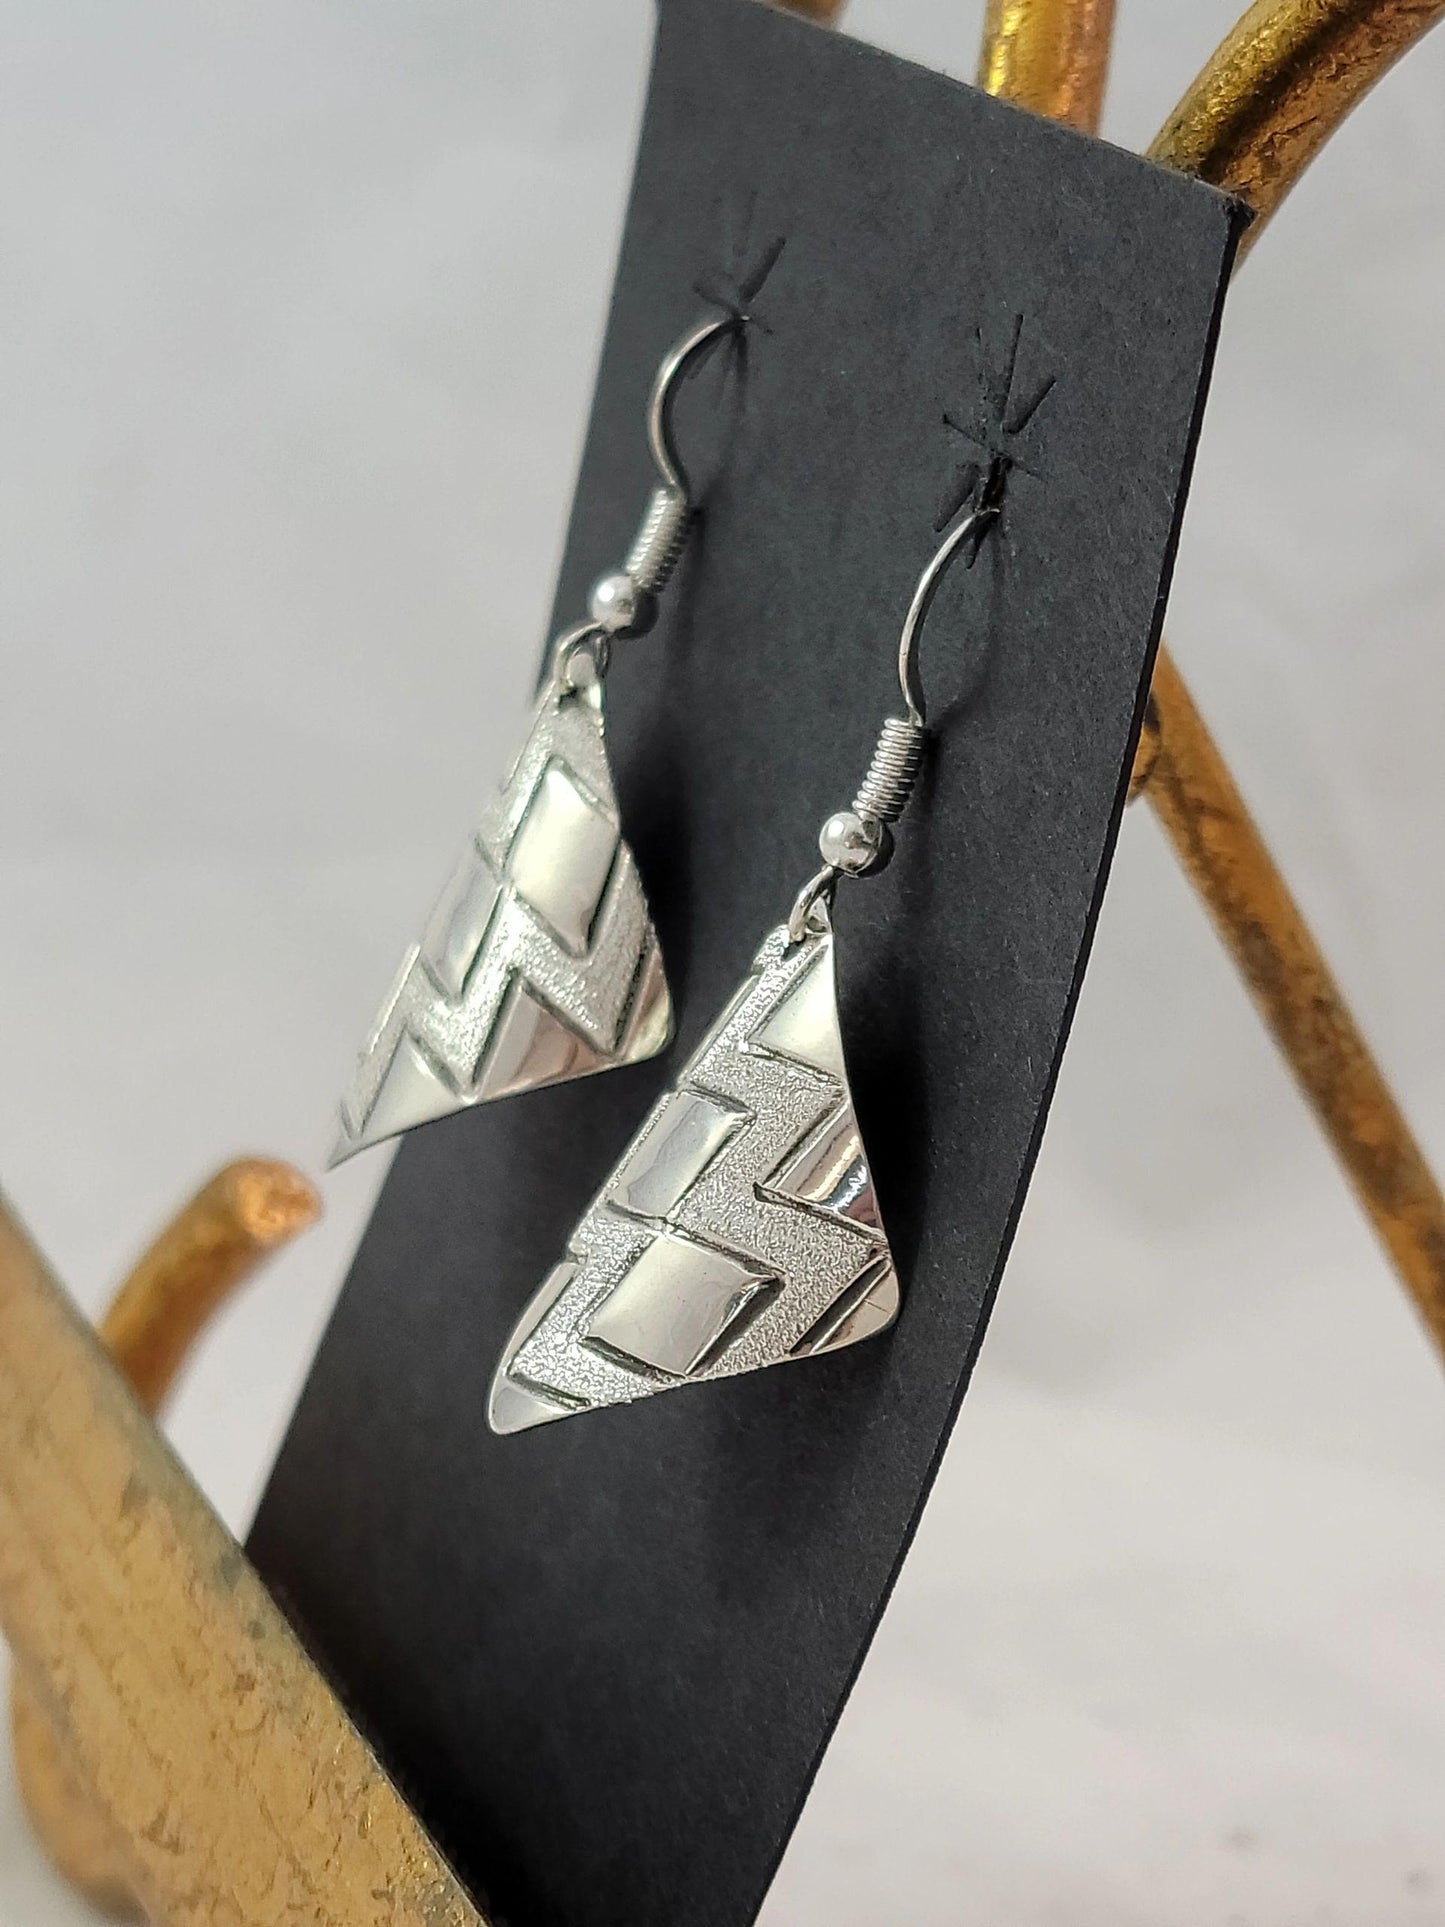 Zigzag rolled 1 inch earrings - Albuquerque Pawn Shop